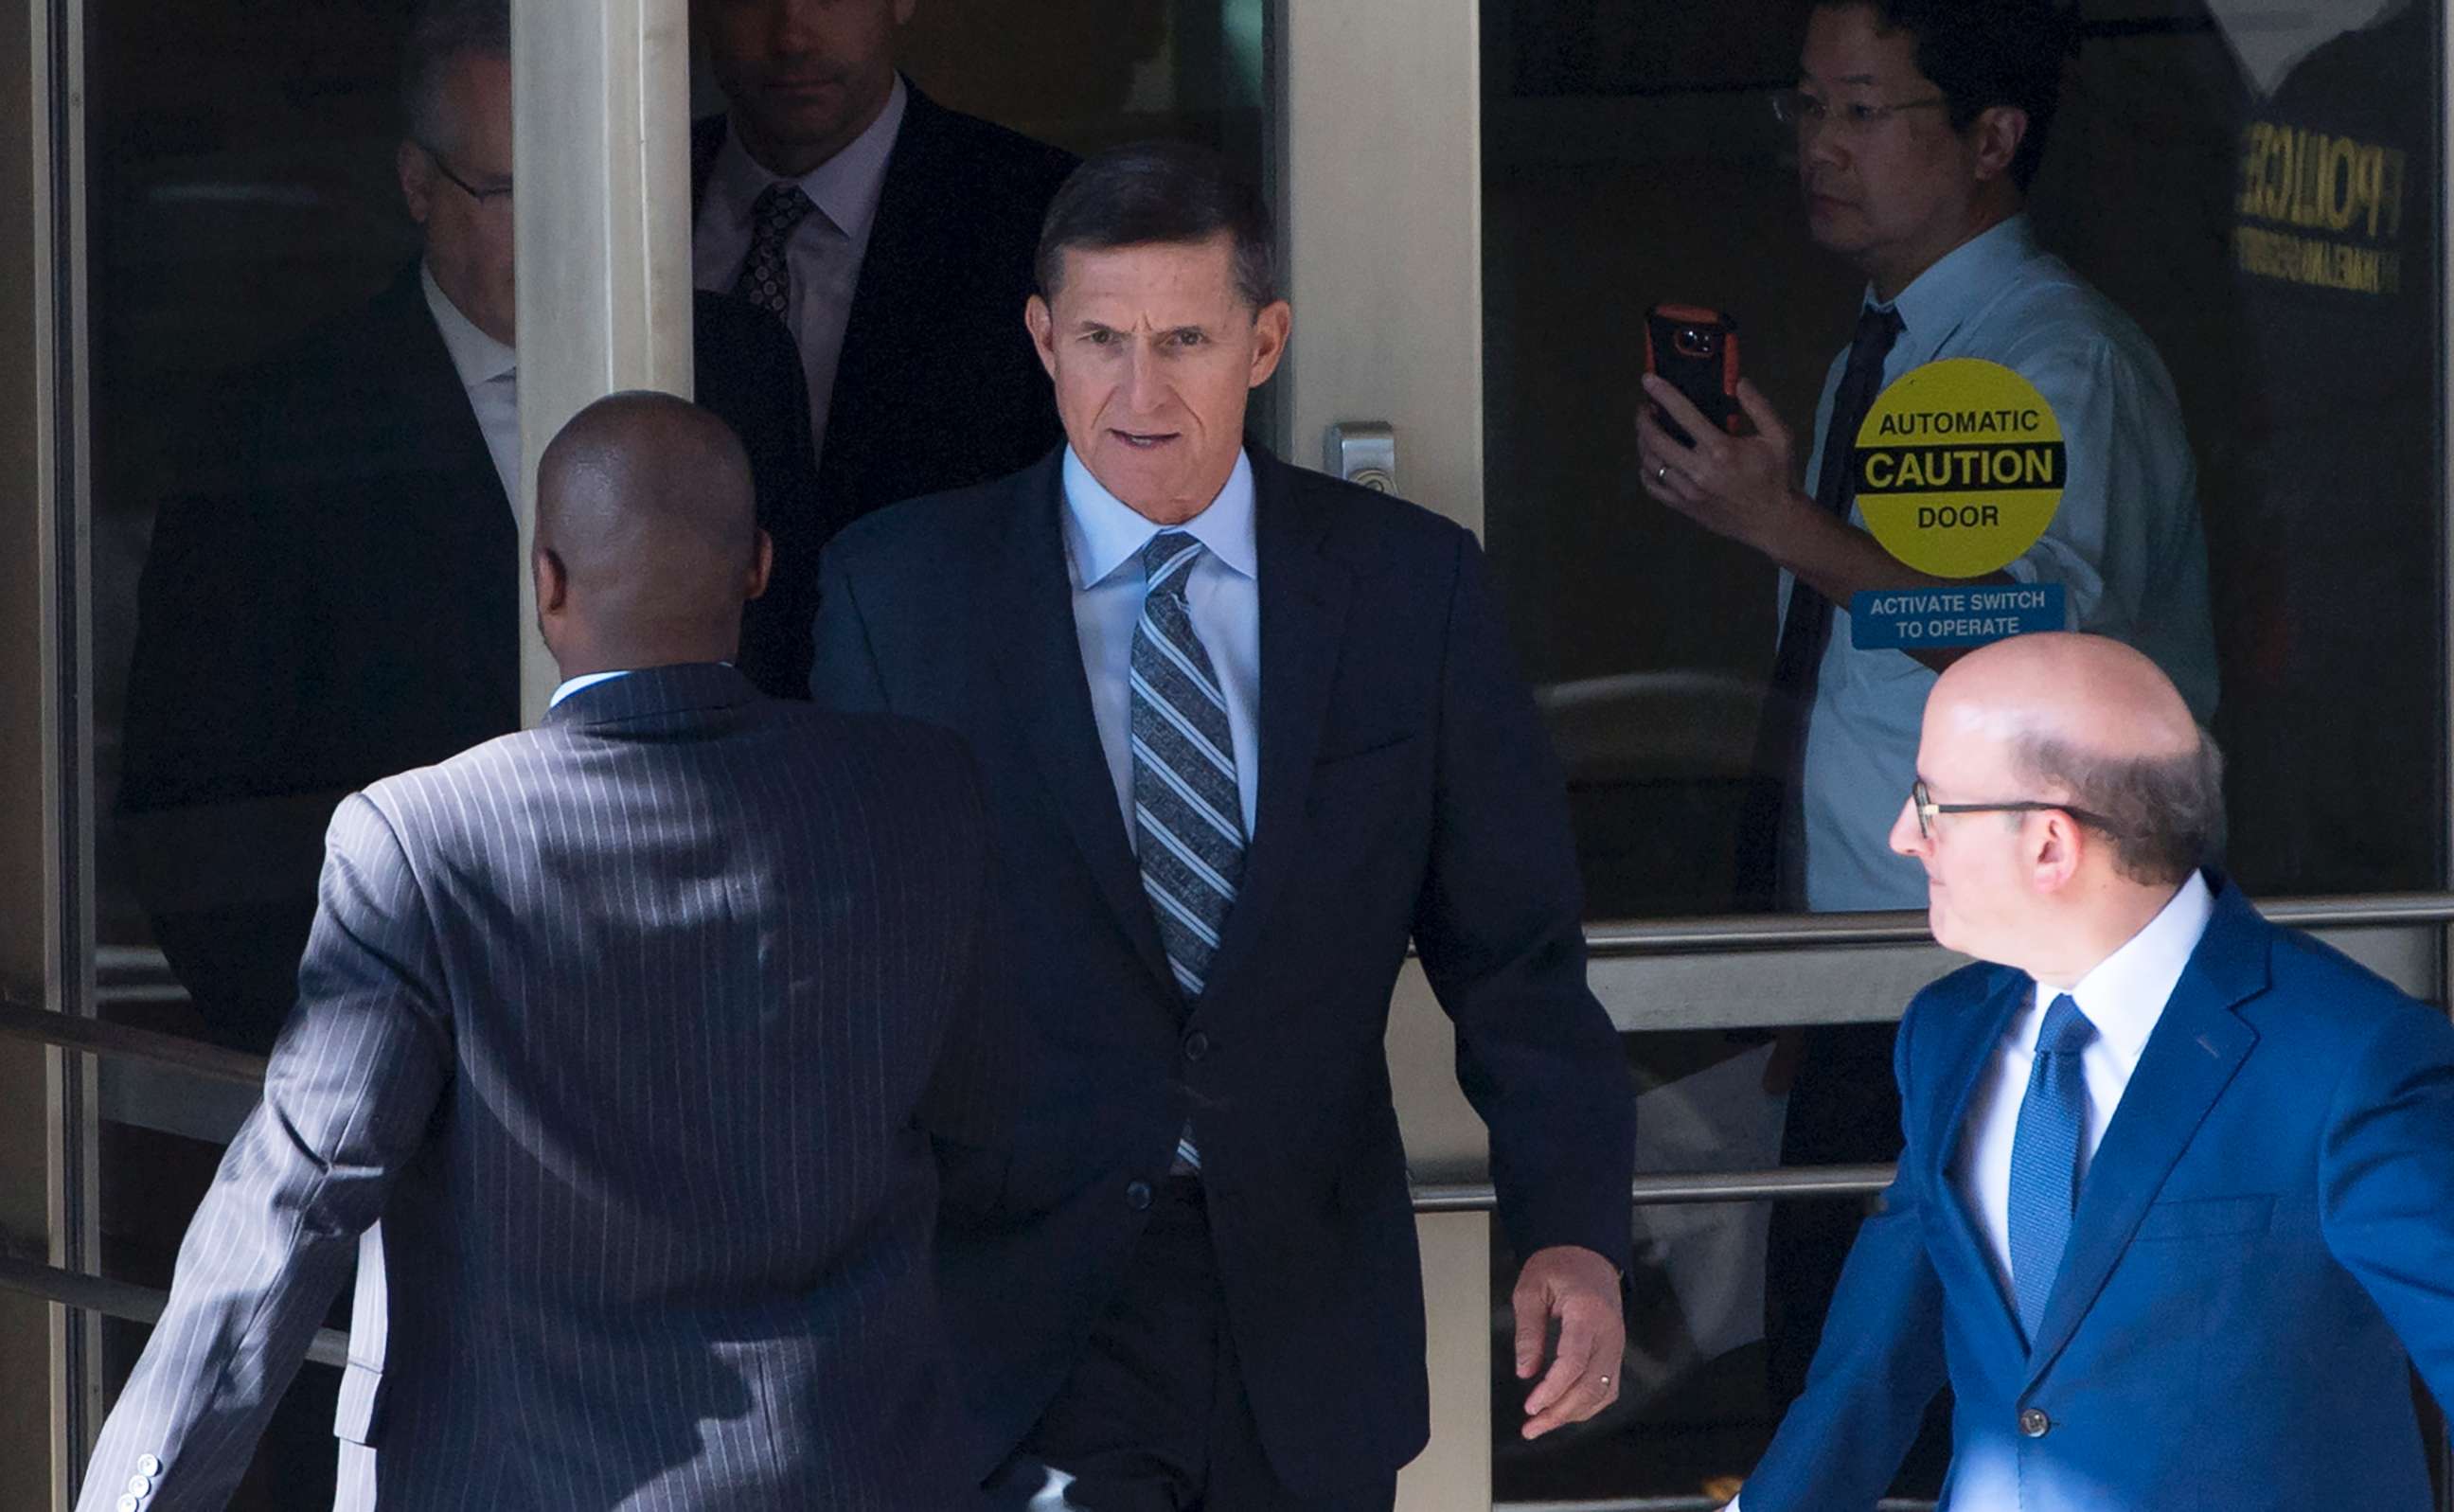 PHOTO: Gen. Michael Flynn, center, with his attorney, Robert Kelner, right, leaves Federal Court in Washington, DC, December 1, 2017 after pleading guilty to one count of lying to the FBI about his back-channel negotiations with the Russian ambassador.